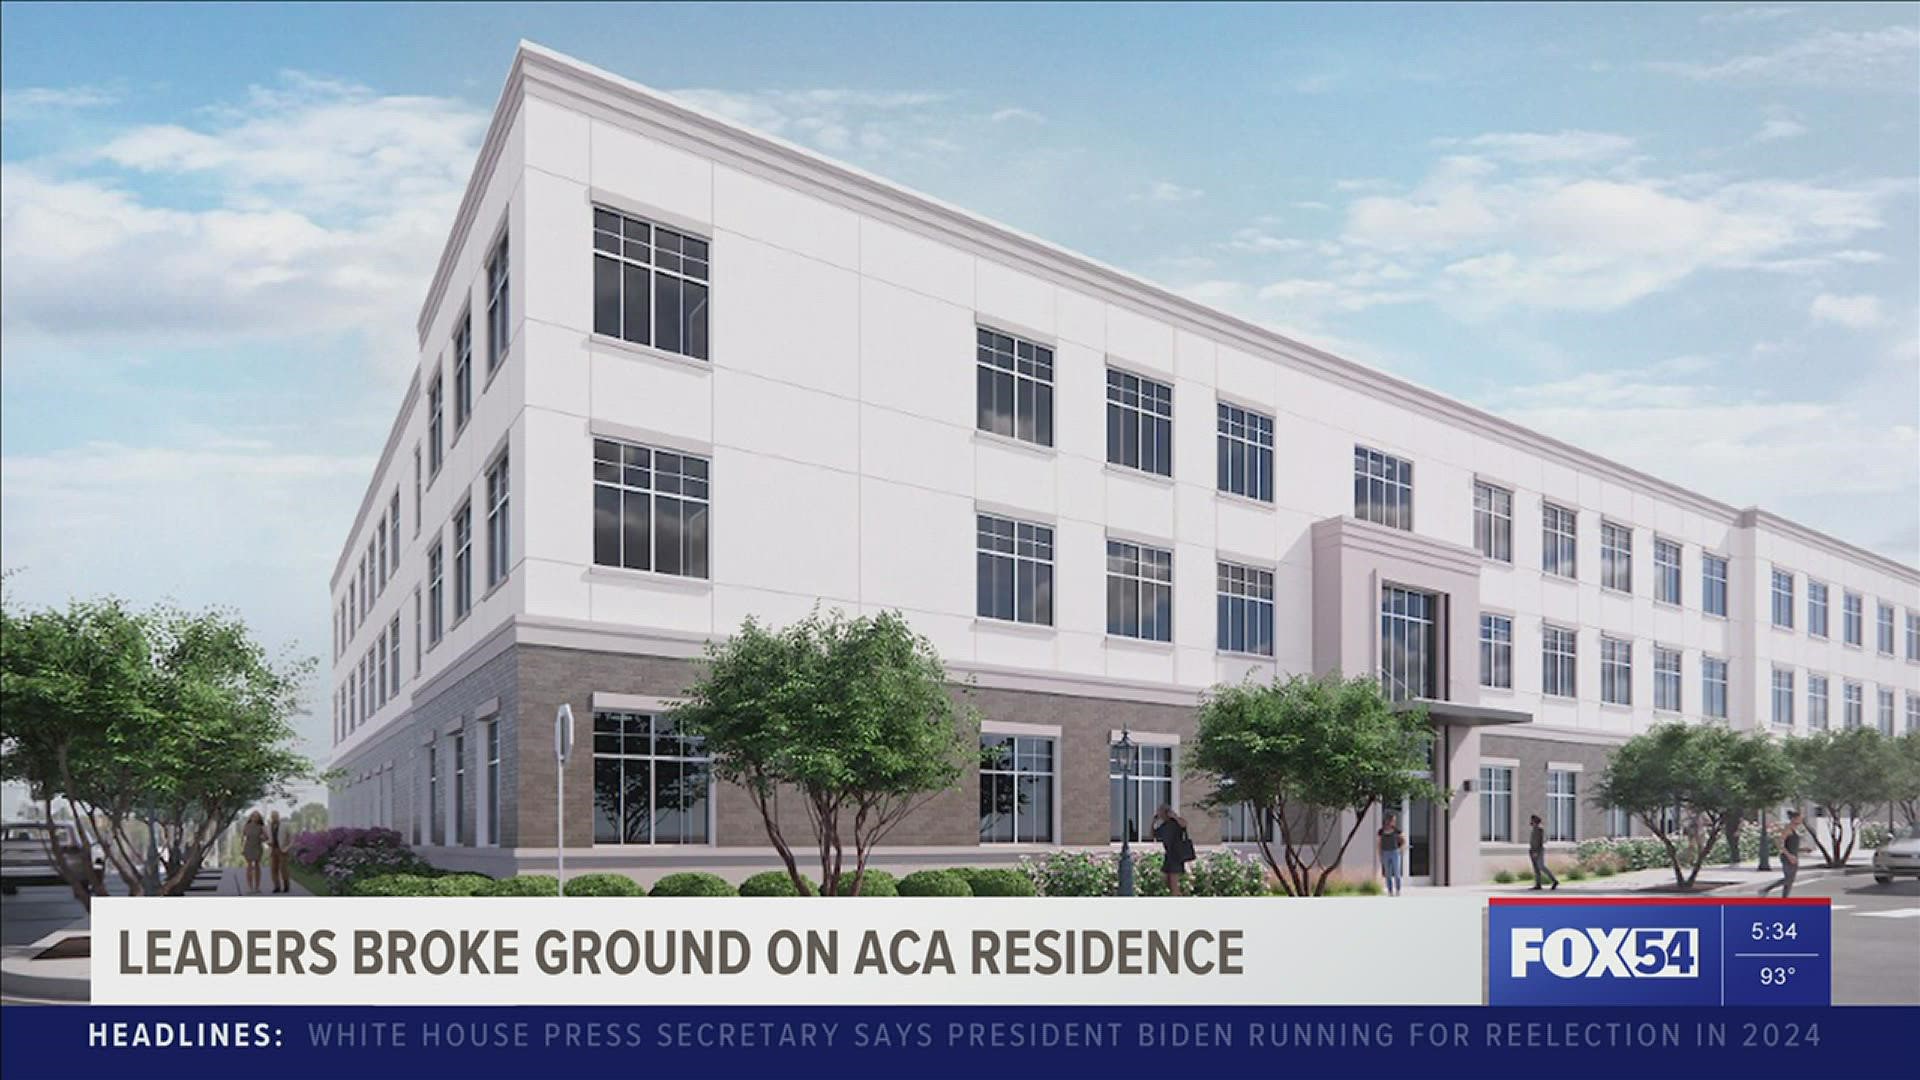 Calhoun and Athens State hosted a groundbreaking ceremony for new residence halls at the Alabama Center for the Arts (ACA) in Decatur.